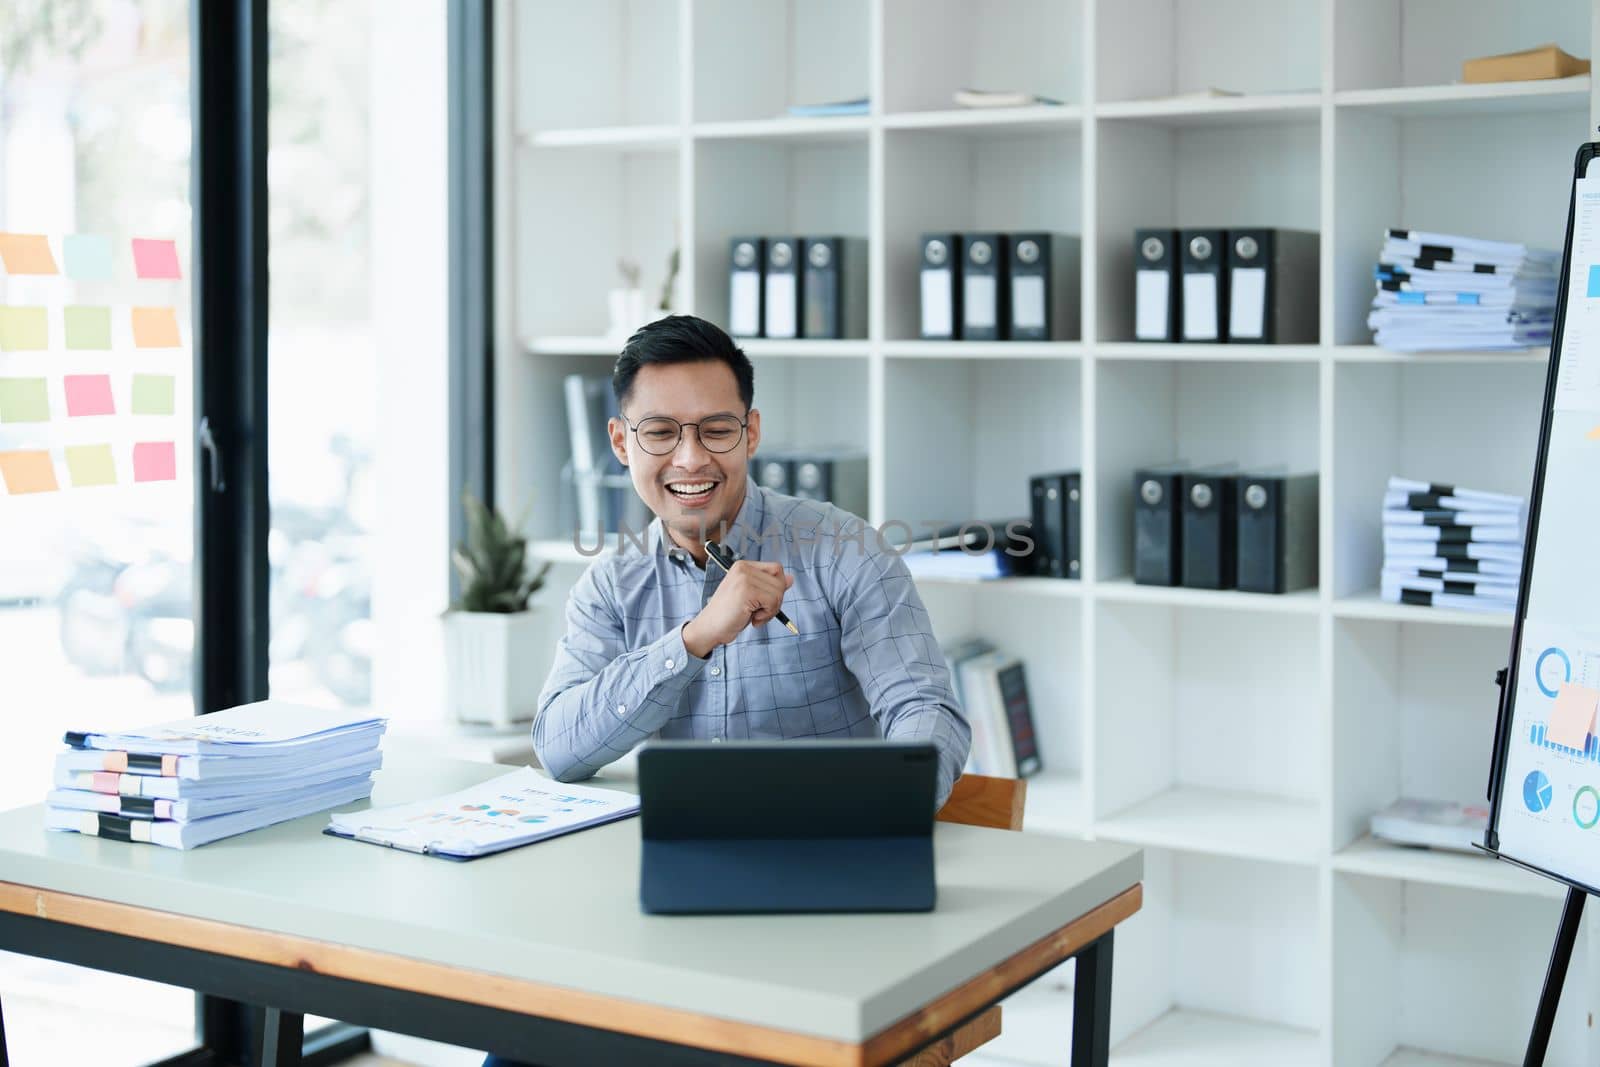 Portrait of a man business owner showing a happy smiling face as he has successfully invested her business using computers and financial budget documents at work by Manastrong